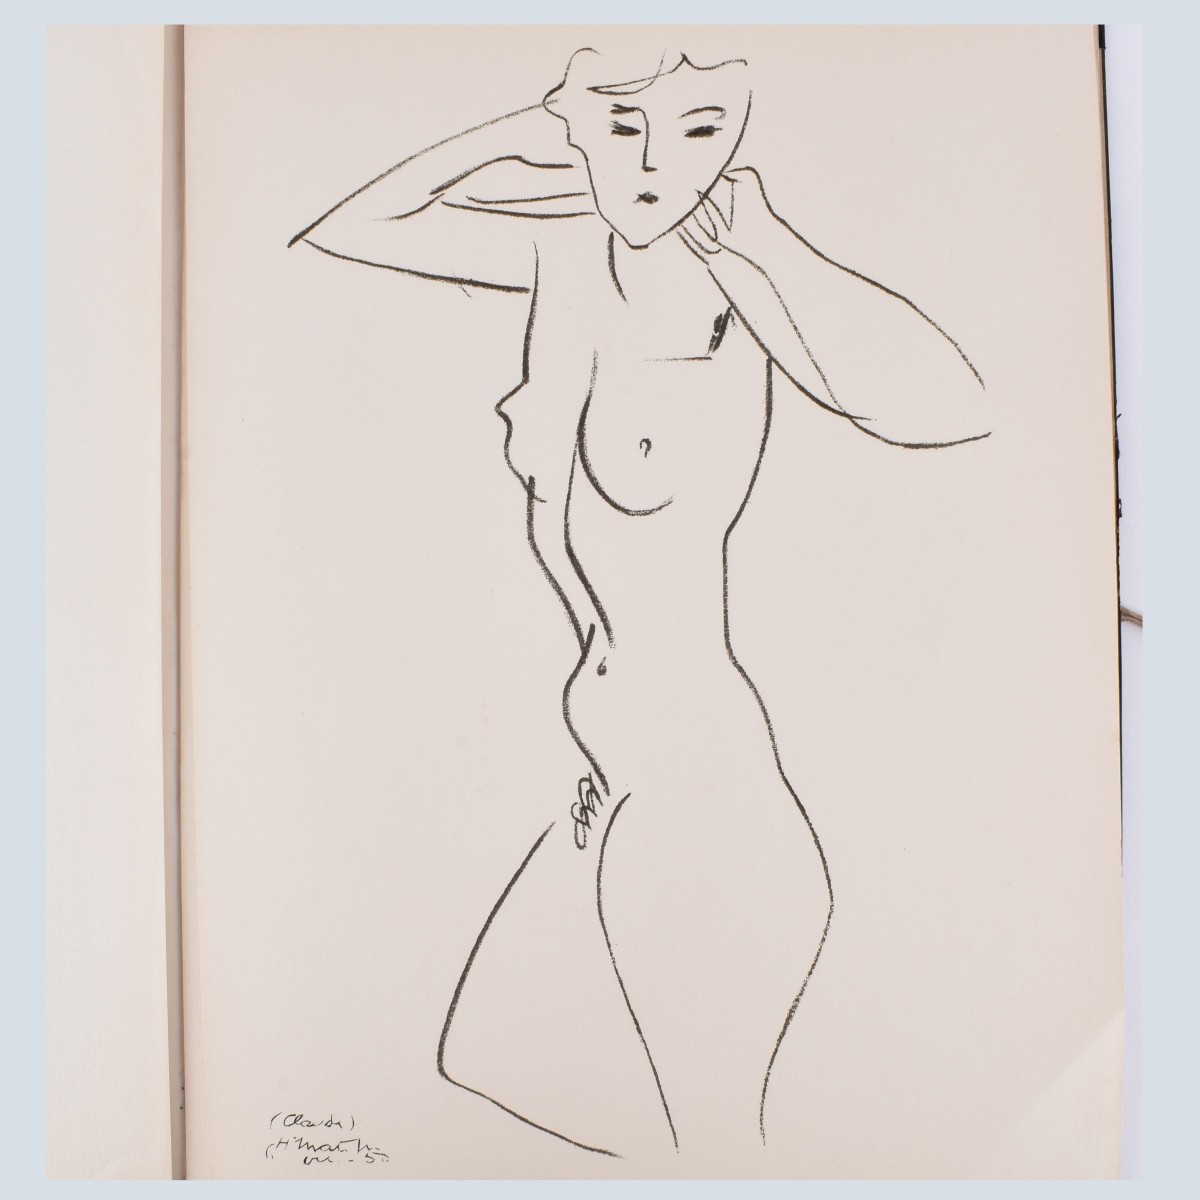 After: Matisse Henri "A Gallery of Women" Sketches